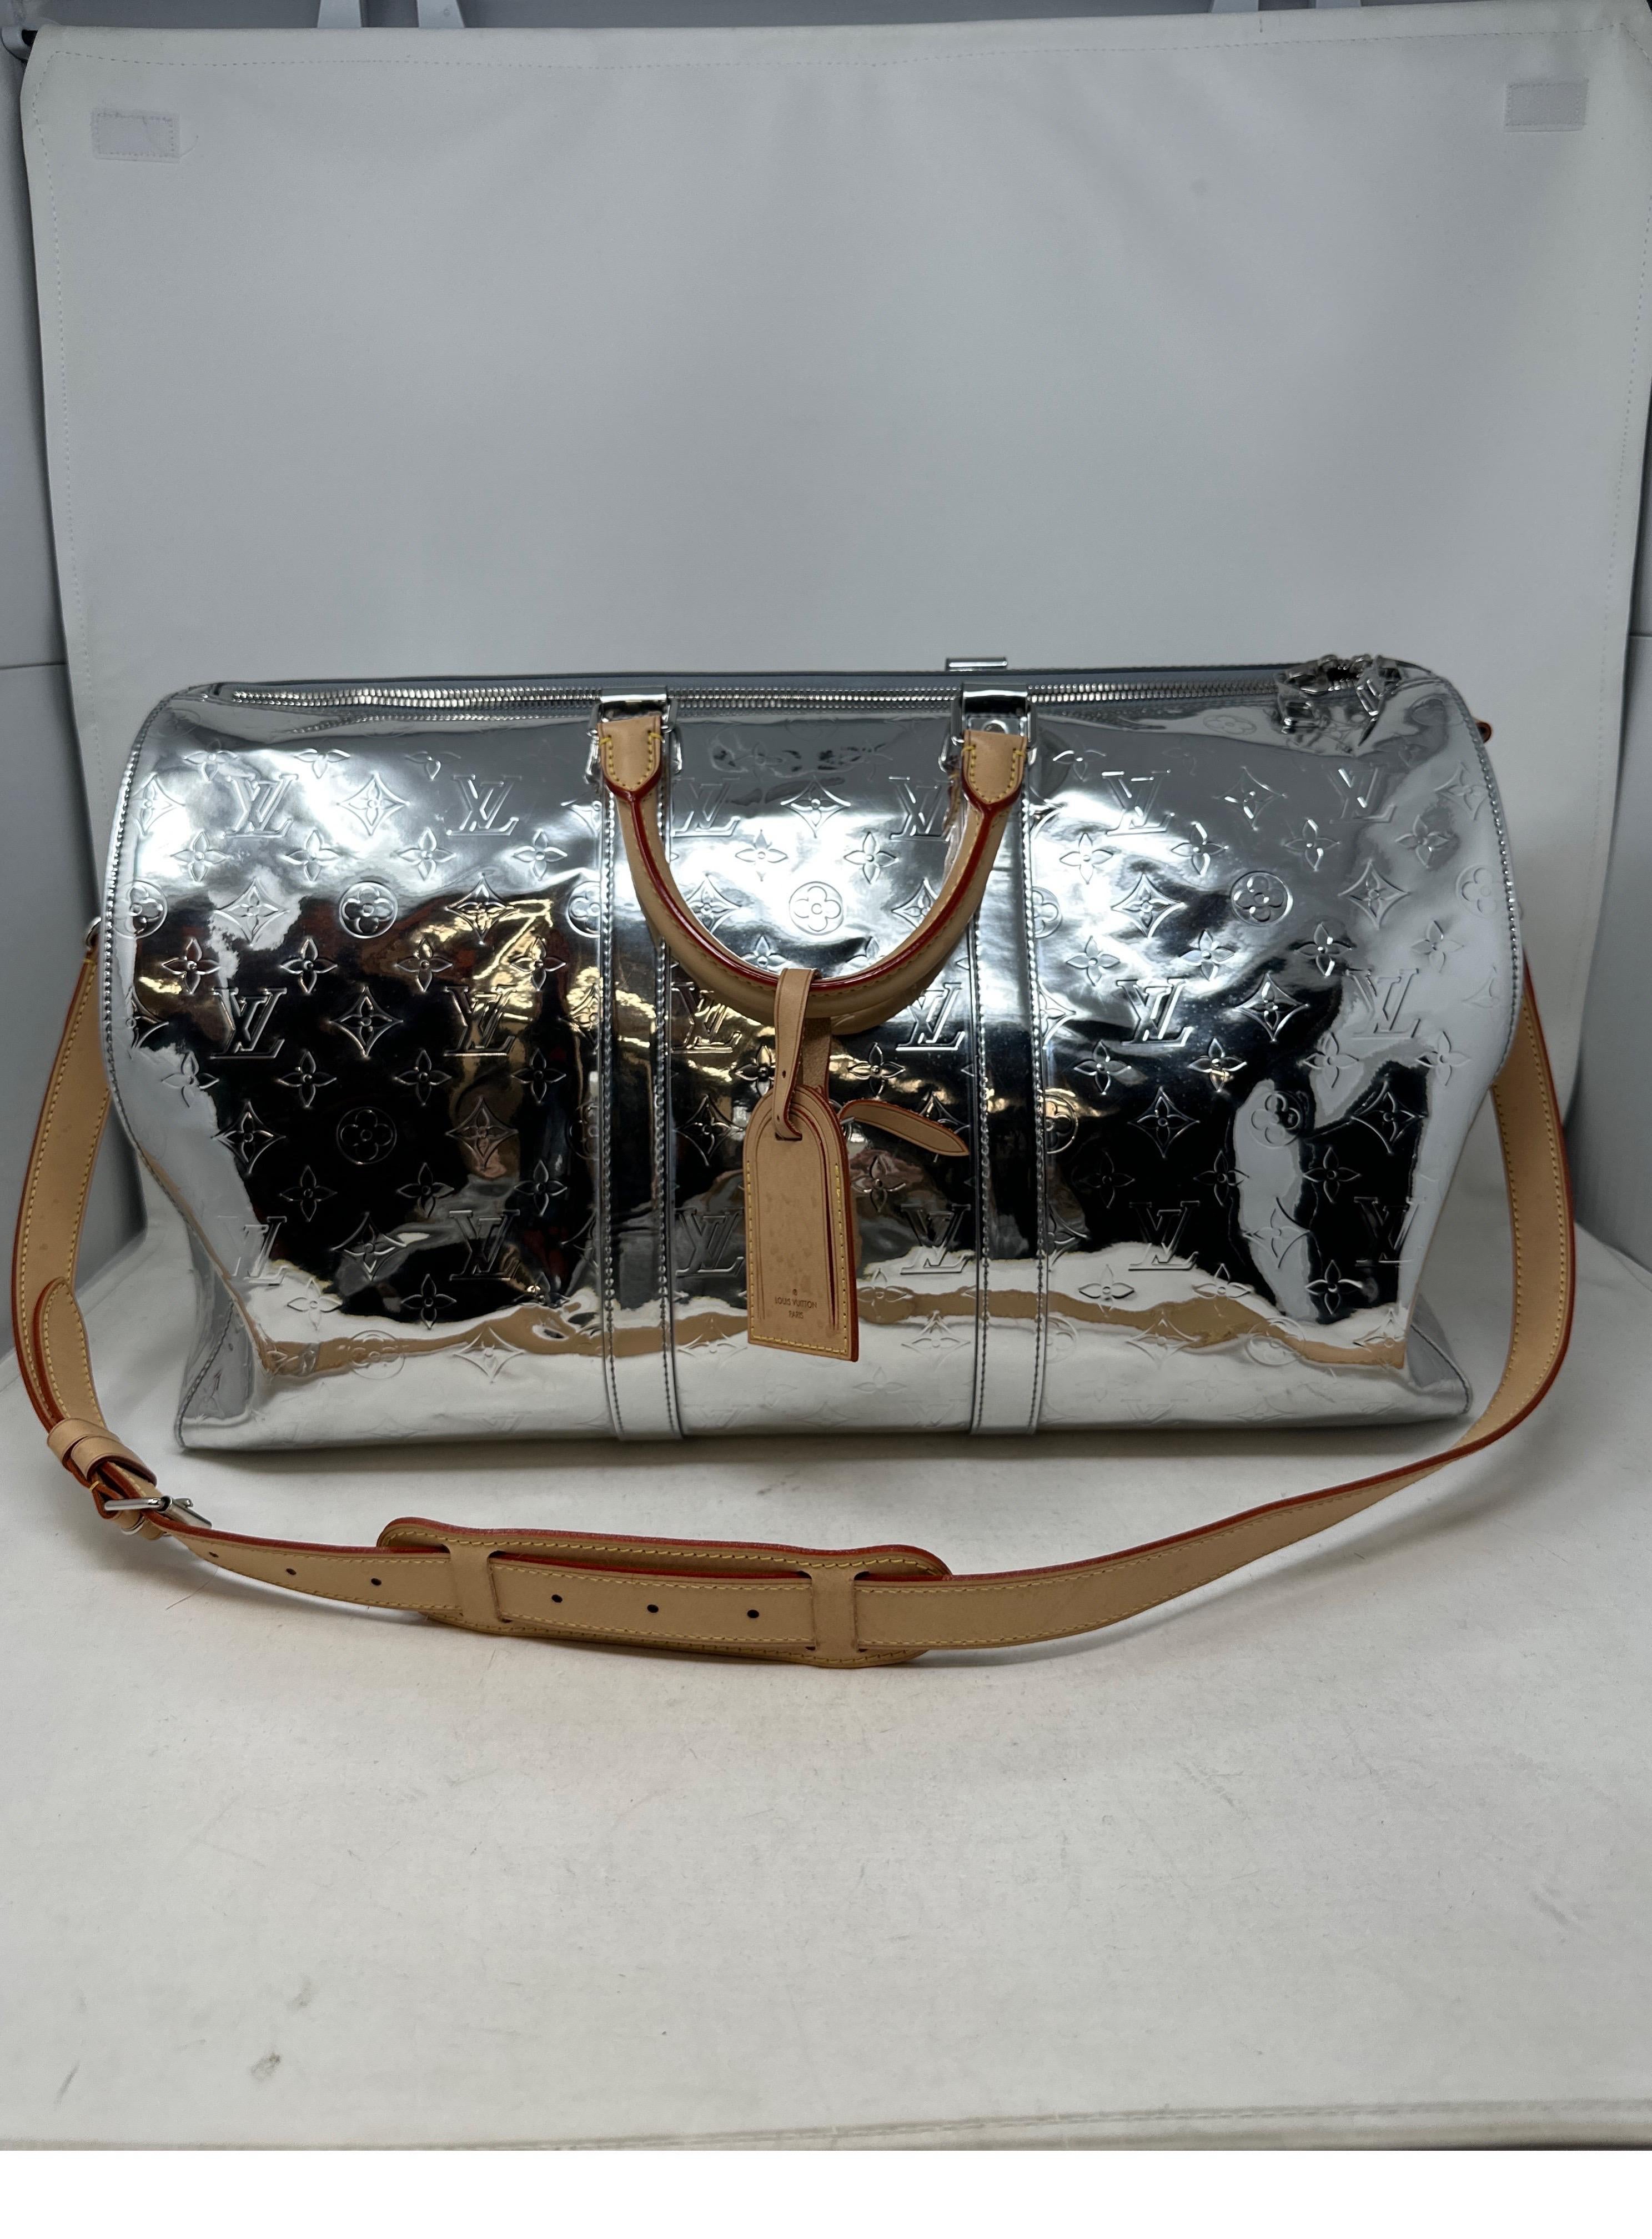 Louis Vuitton Virgil Abloh Mirror Keepall 50 Bandouliere. Iconic and rare silver vernis patent leather monogram. Silver mirror collection from 2021. Limited edition by Virgil. The most wanted luggage for collectors. Excellent like new condition.